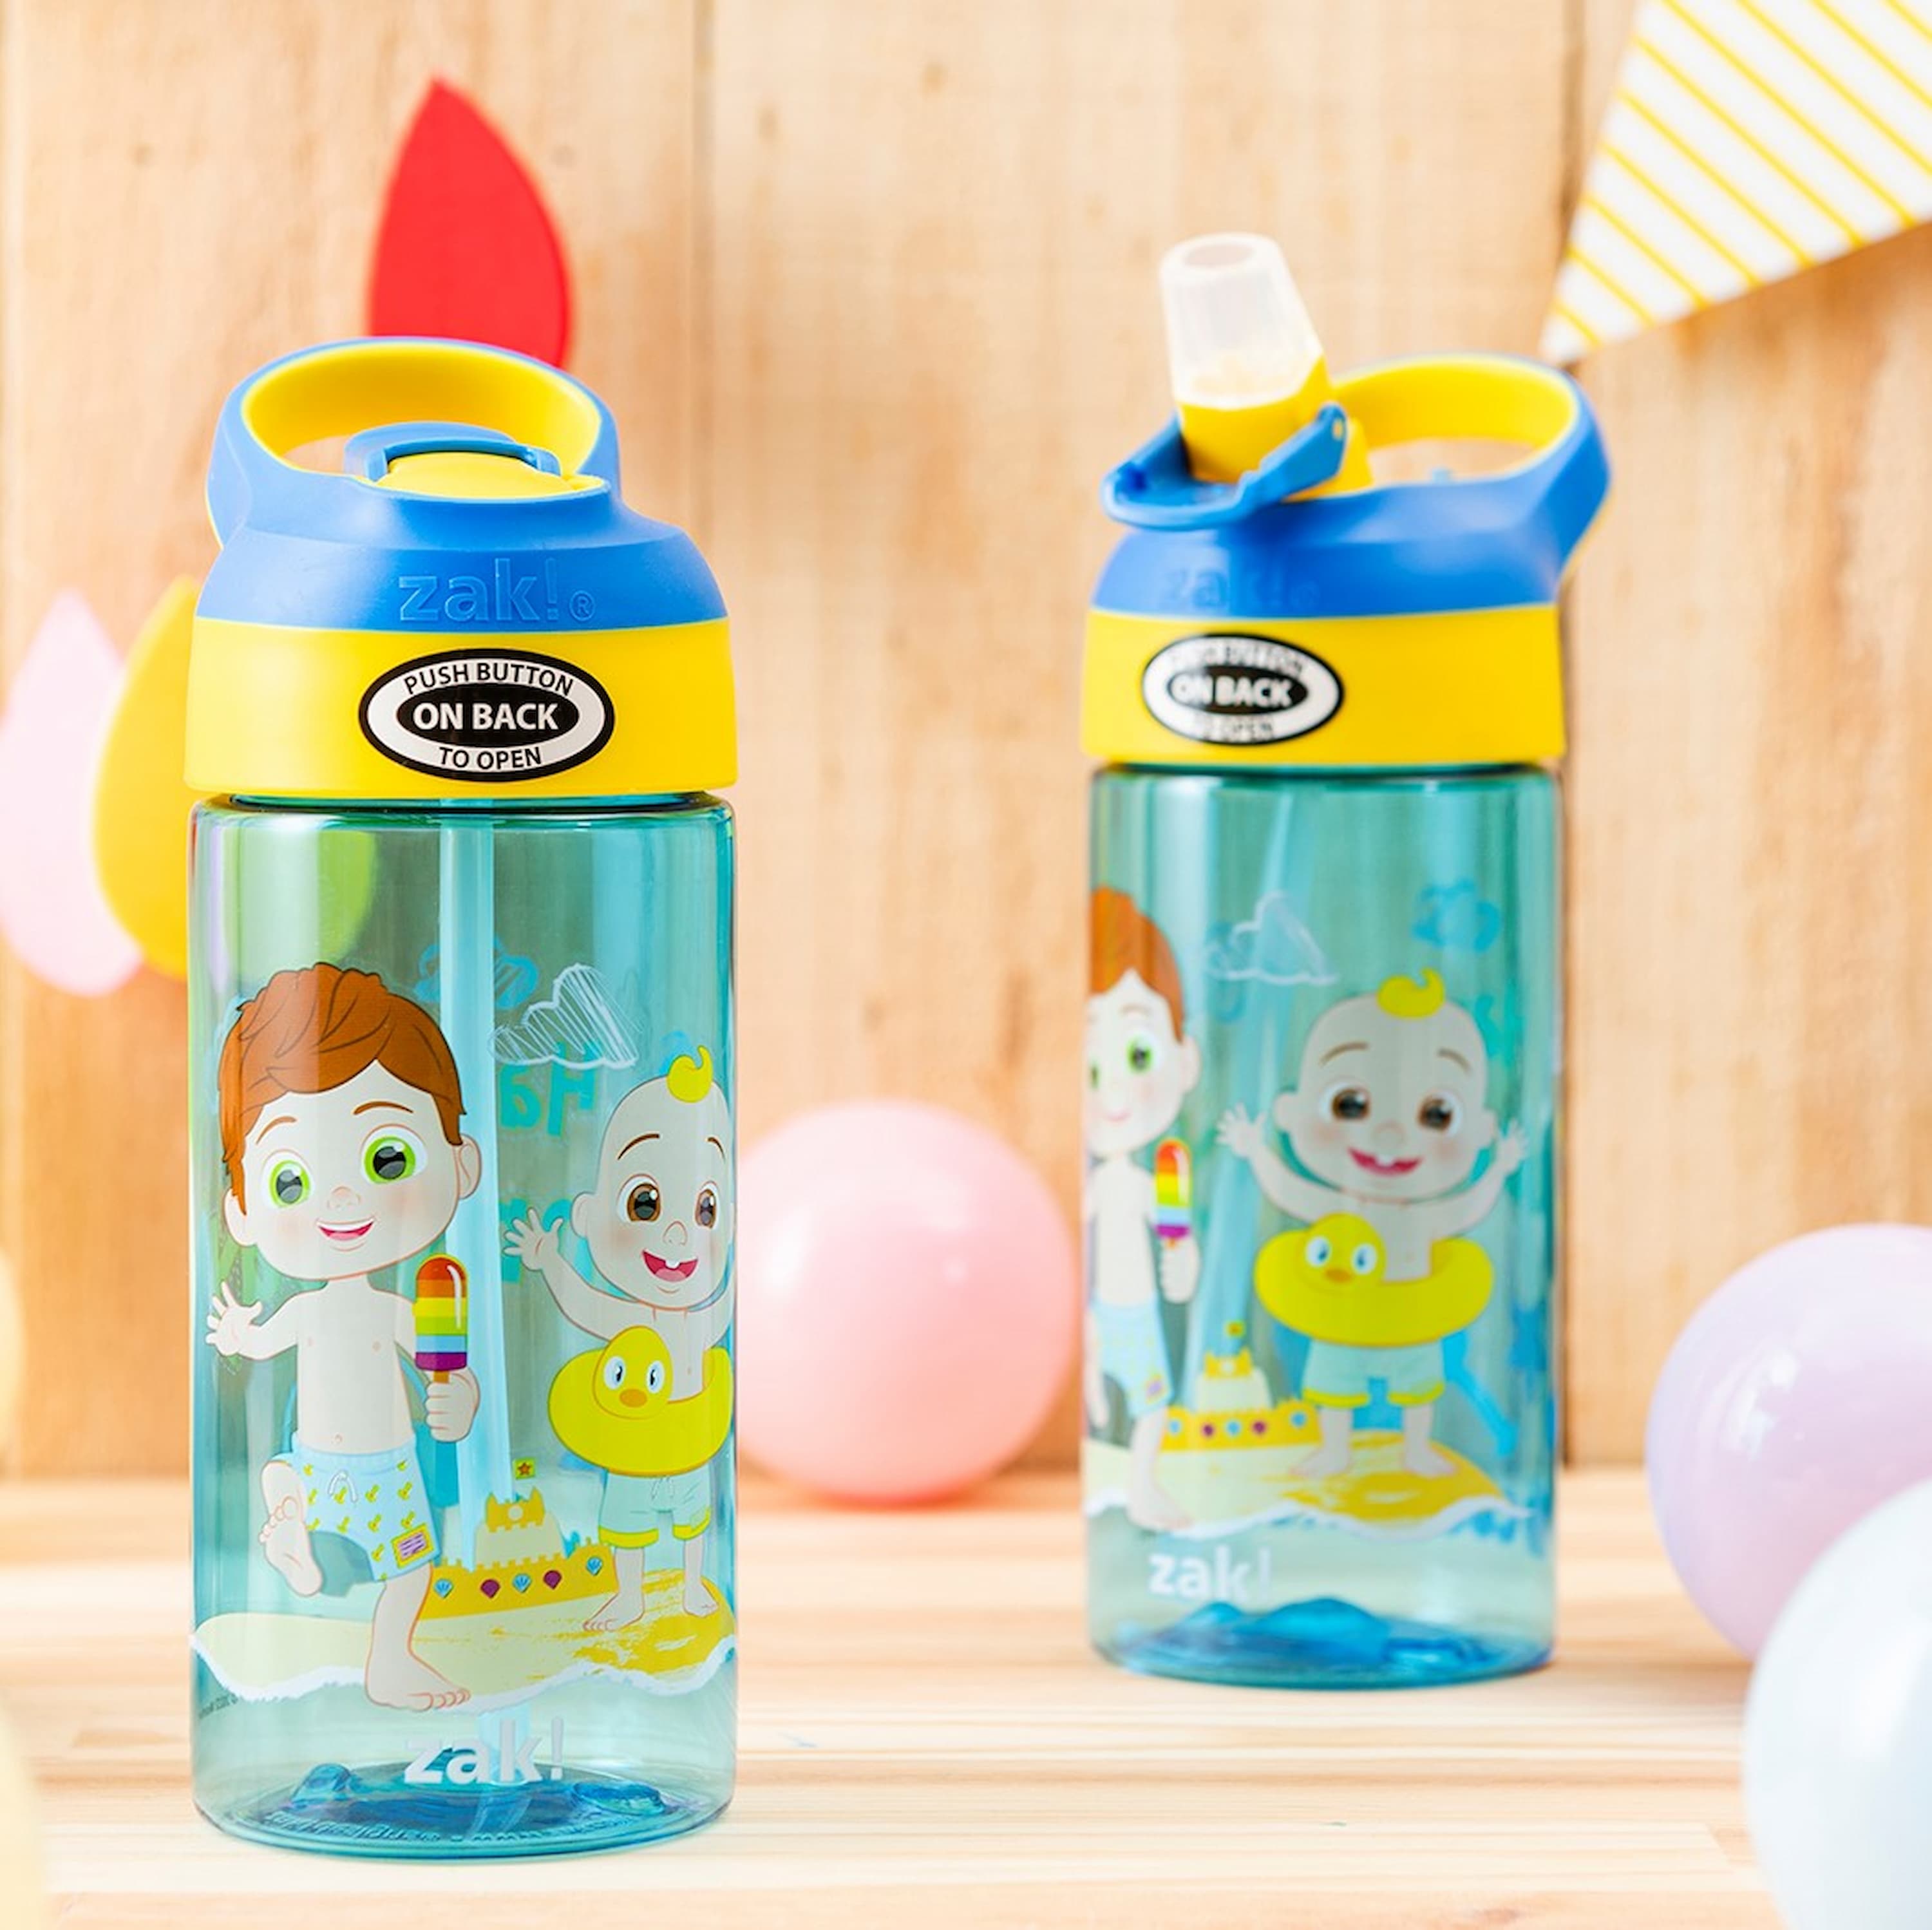 CoComelon 17.5 ounce Water Bottle, Happy, Sunny Day!, 2-piece set slideshow image 5